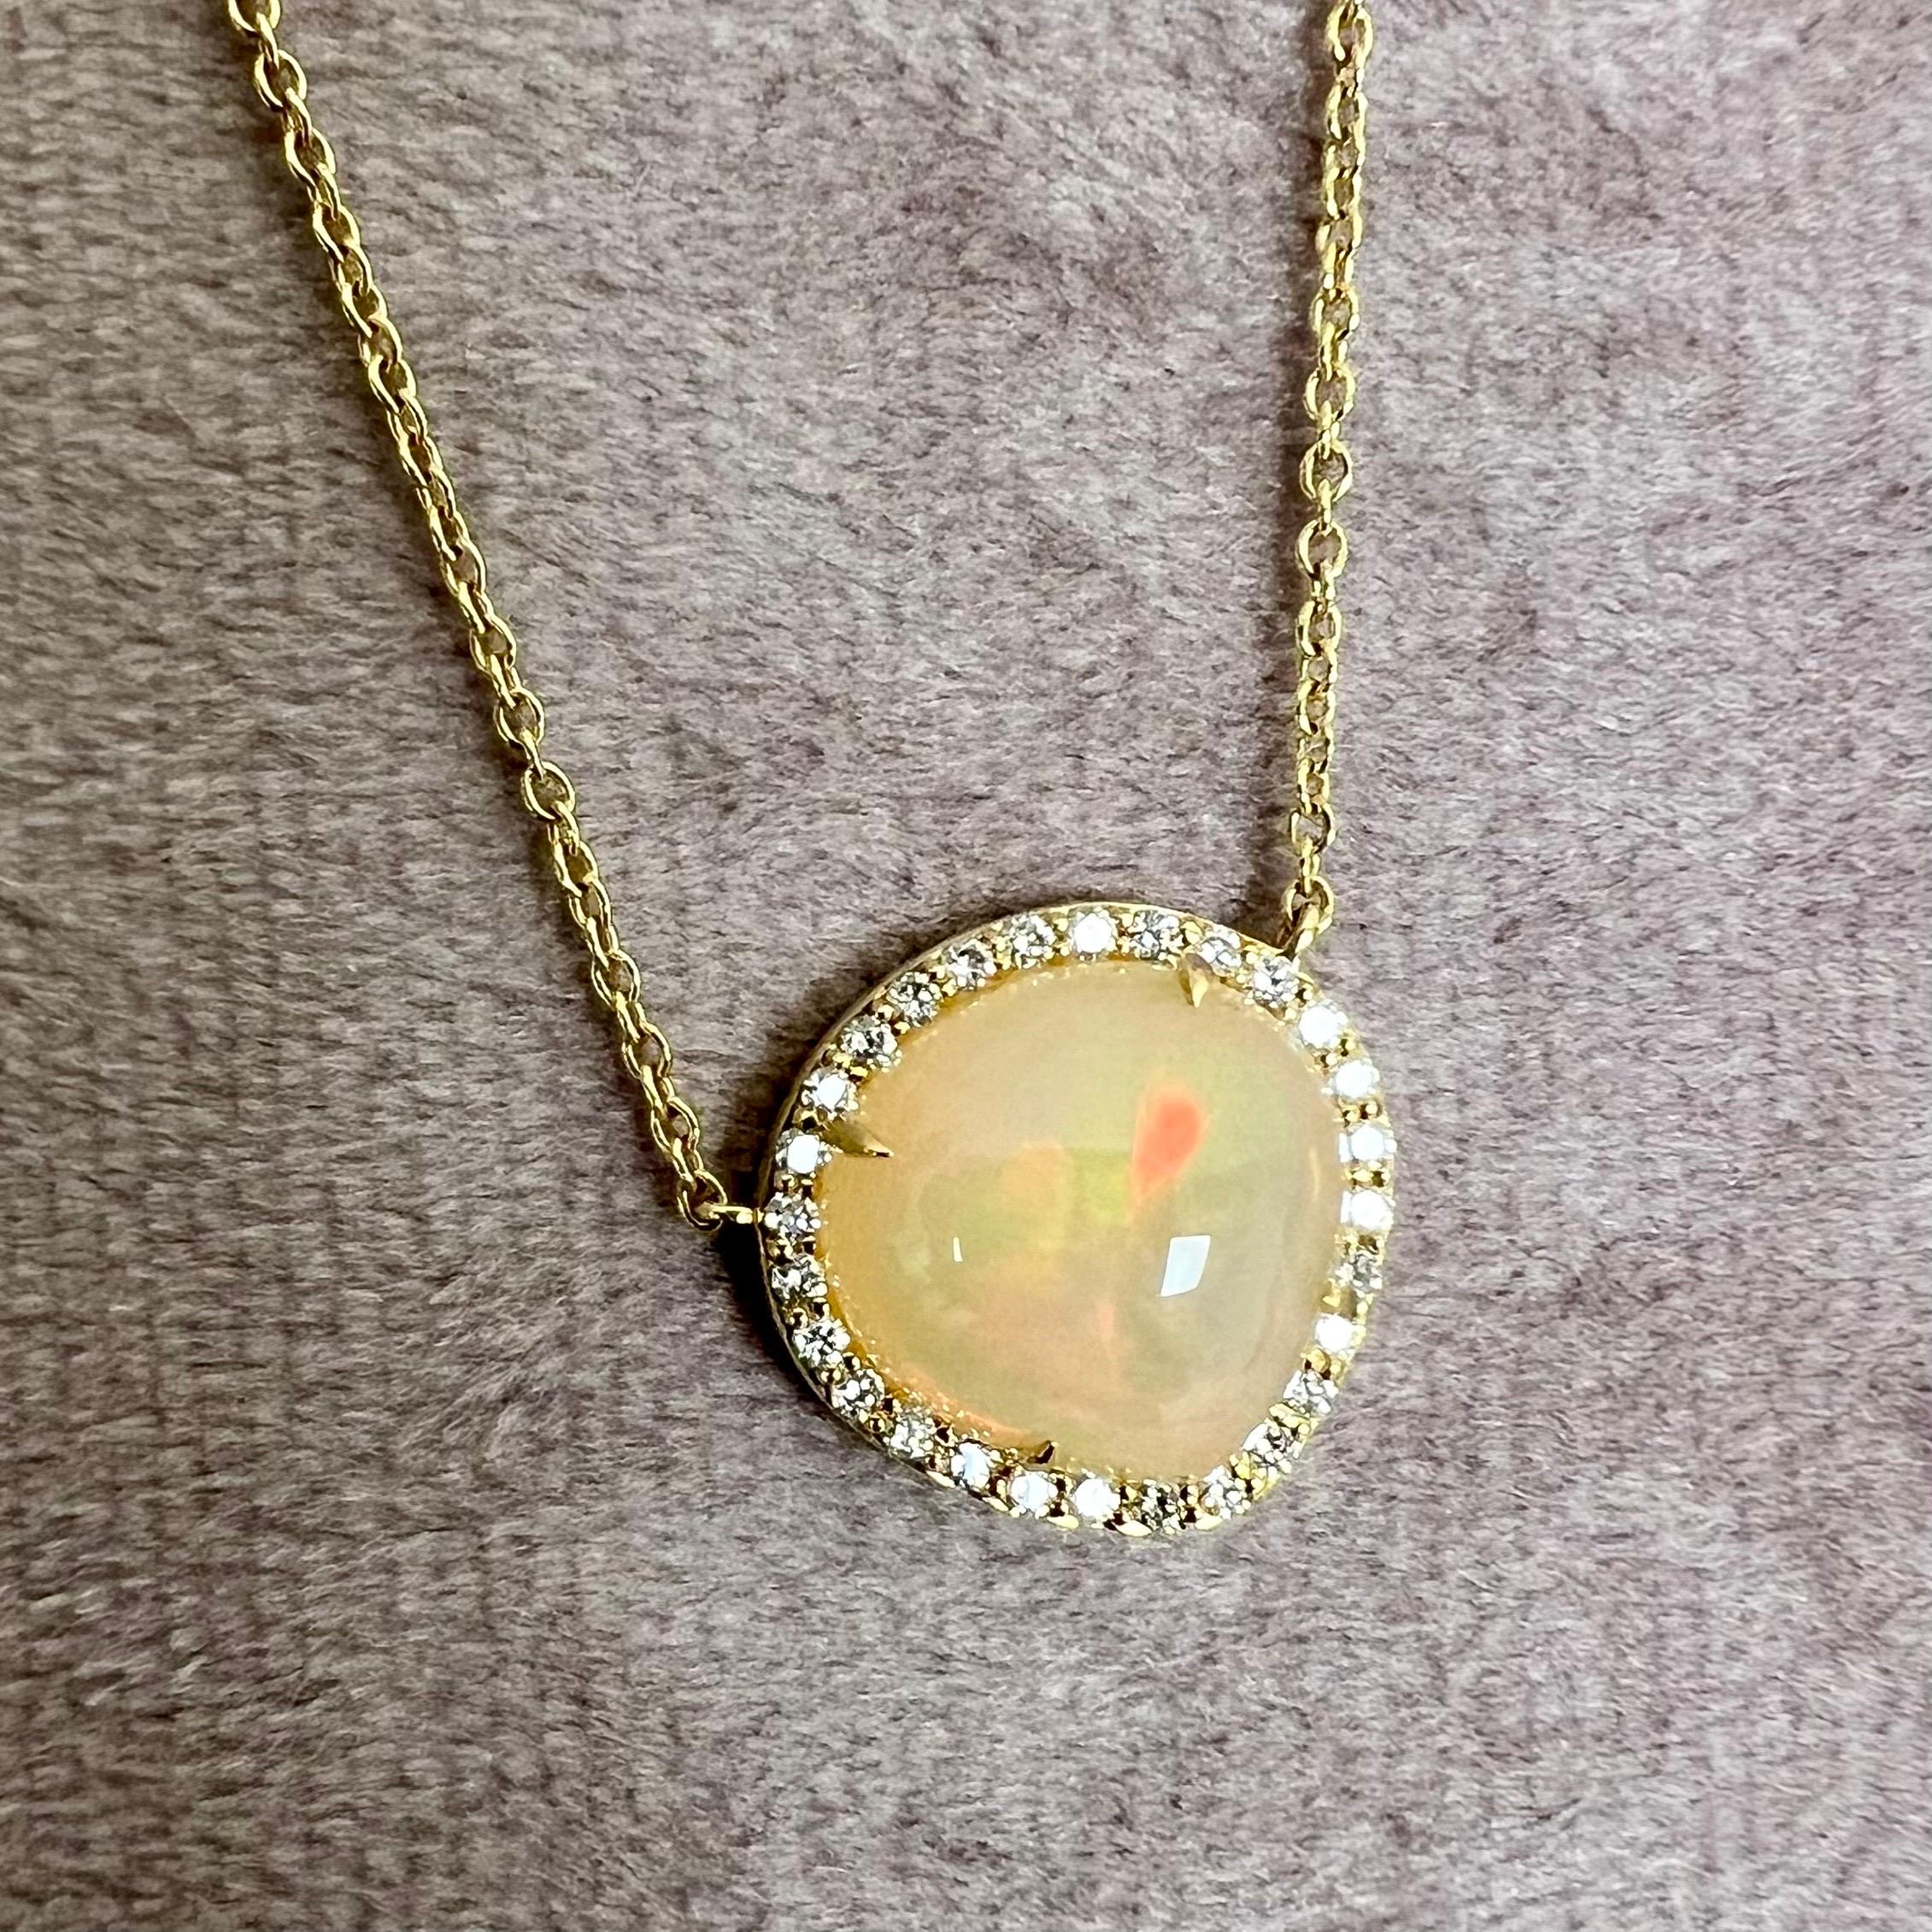 Created in 18 karat yellow gold
Ethiopian opal 4 carats approx.
Diamonds 0.25 carat approx.
18 inch necklace can be worn at 16th and 17th inch

Exquisitely fashioned in 18 karat yellow gold, this necklace is adorned with a magnificent Ethiopian opal